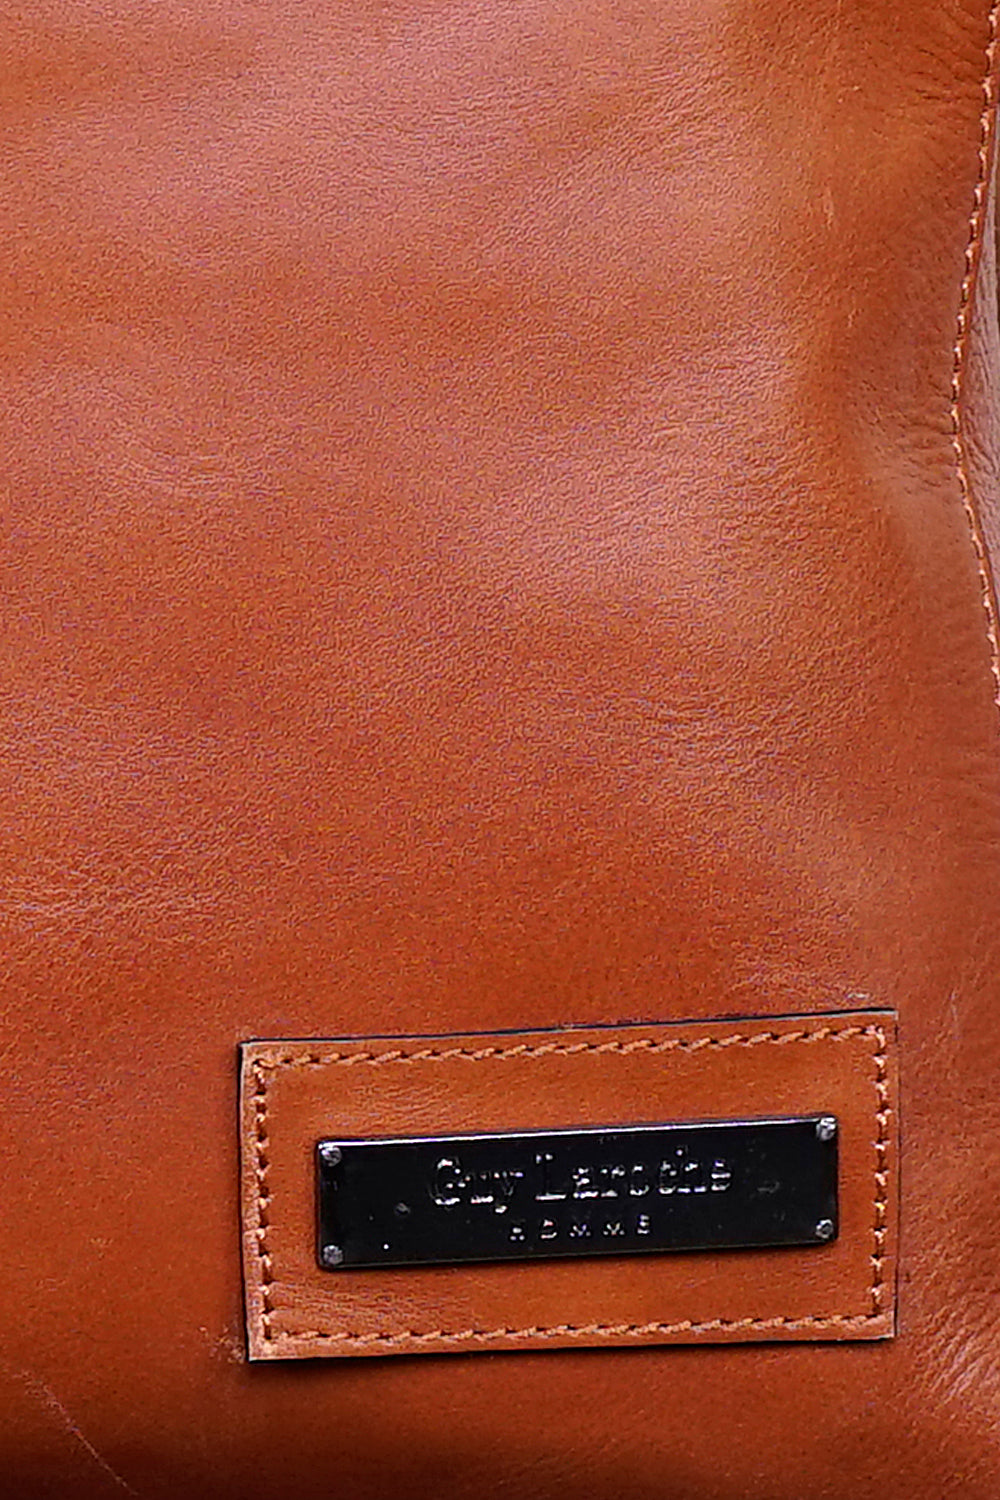 Justanned Men Classy Tan Leather Bag